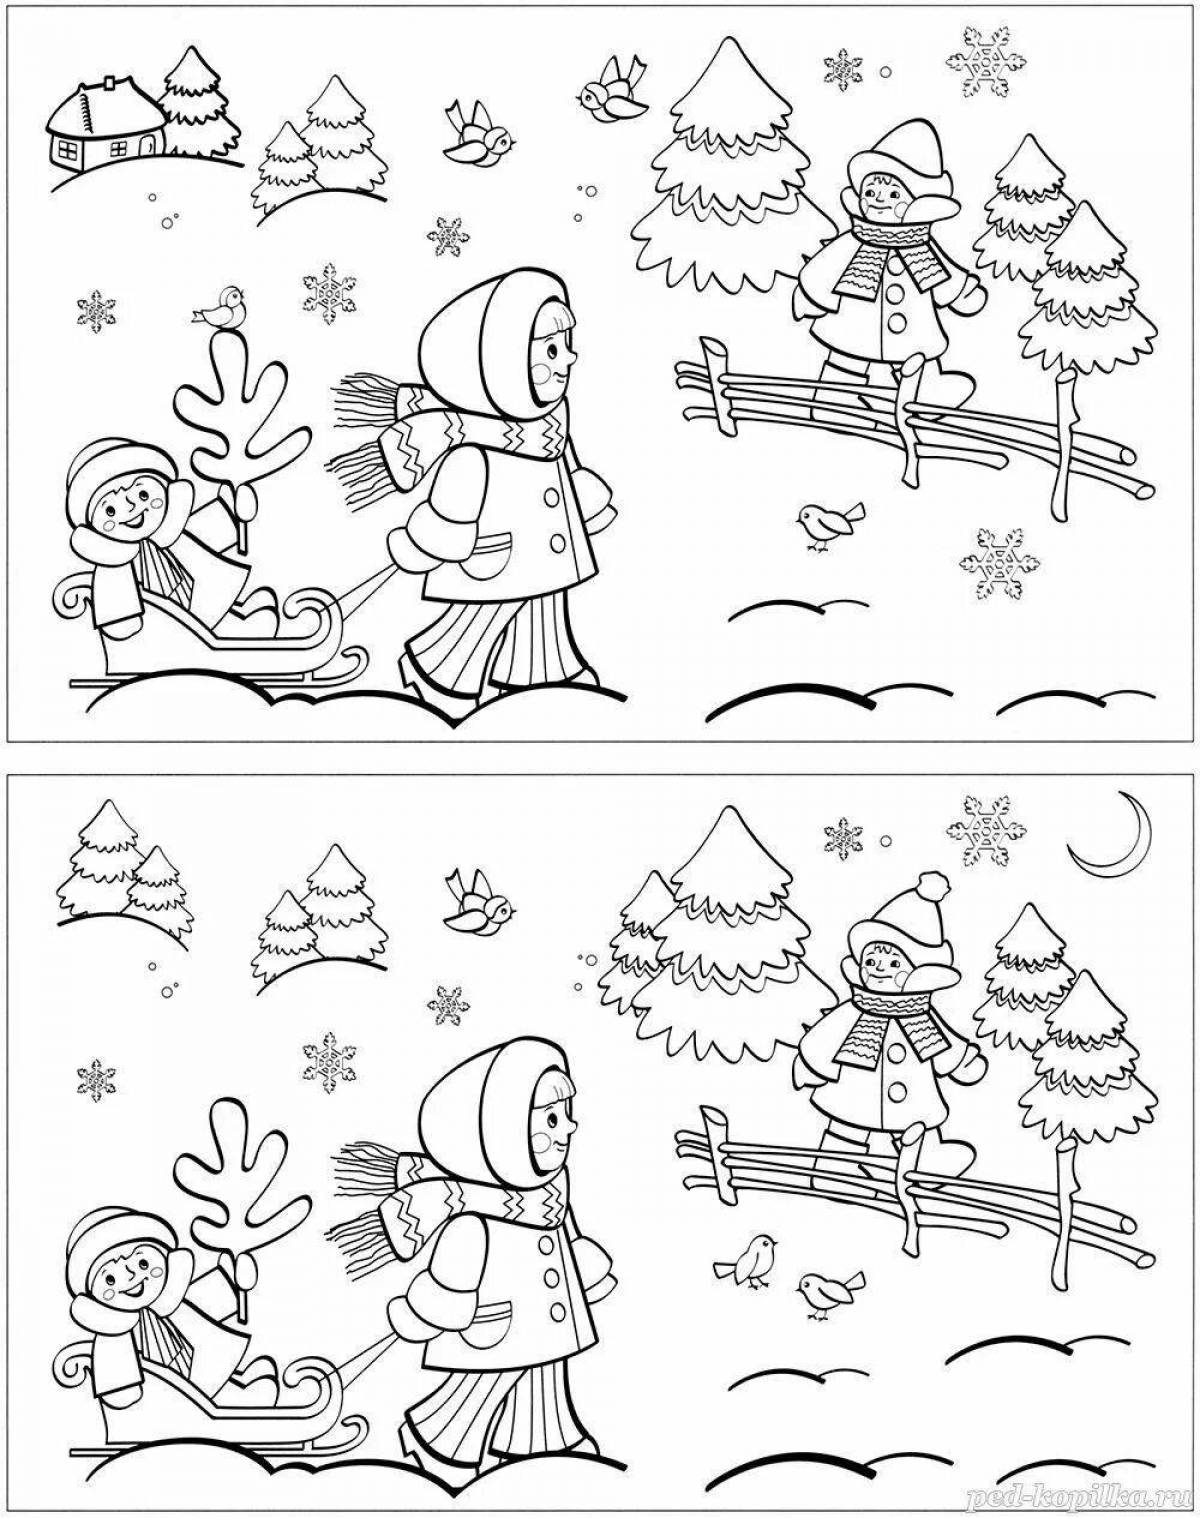 Animated Christmas coloring book for preschoolers